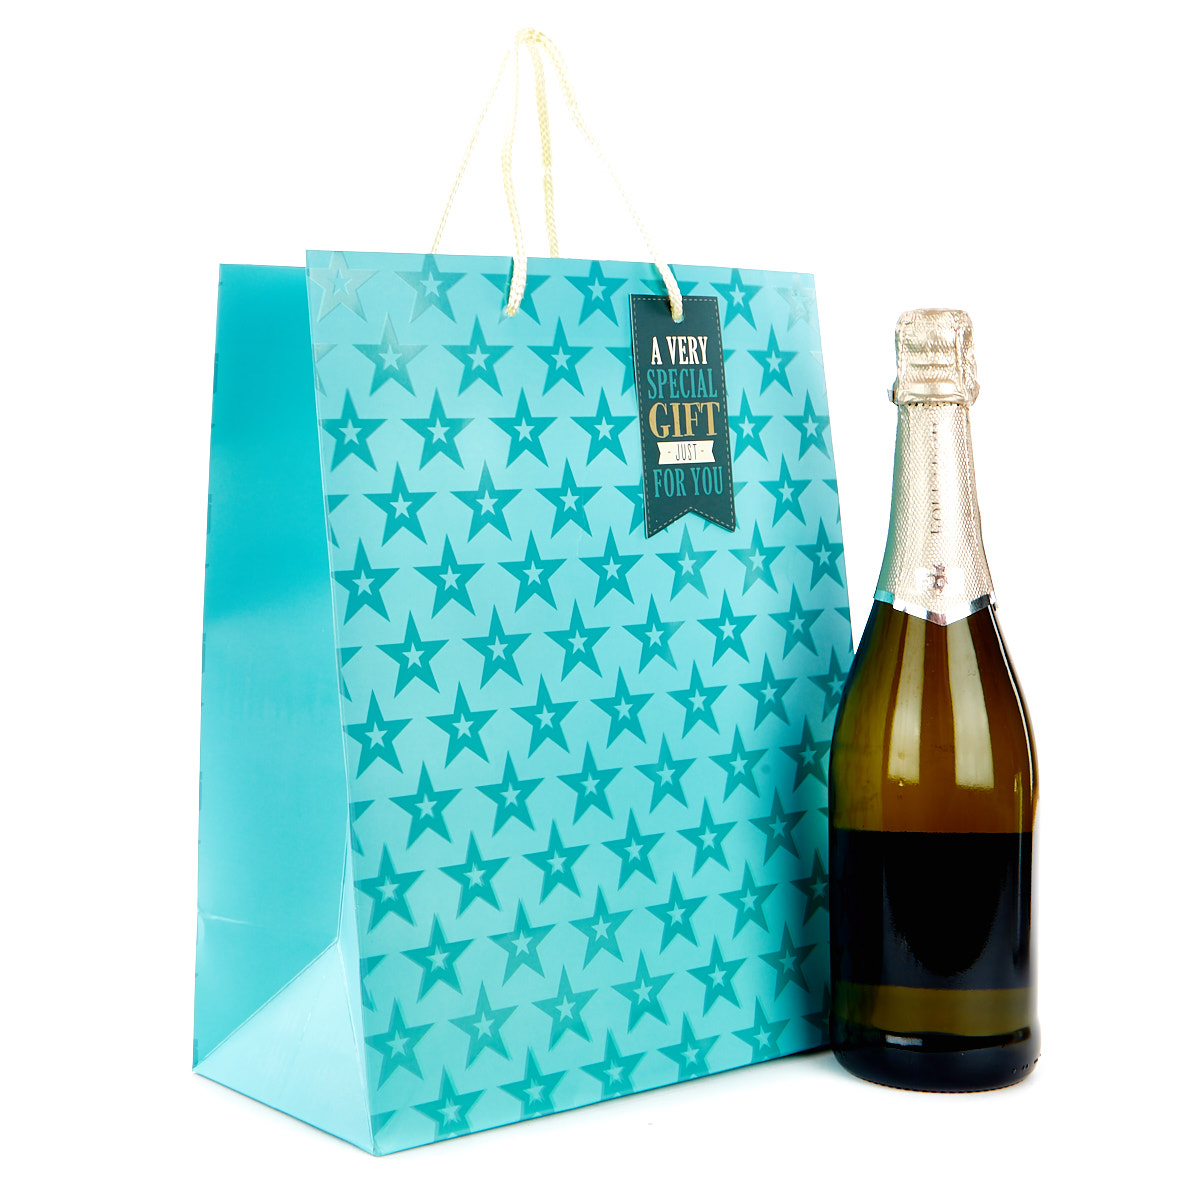 Large Portrait Blue Starry Gift Bag - A Special Gift Just For You